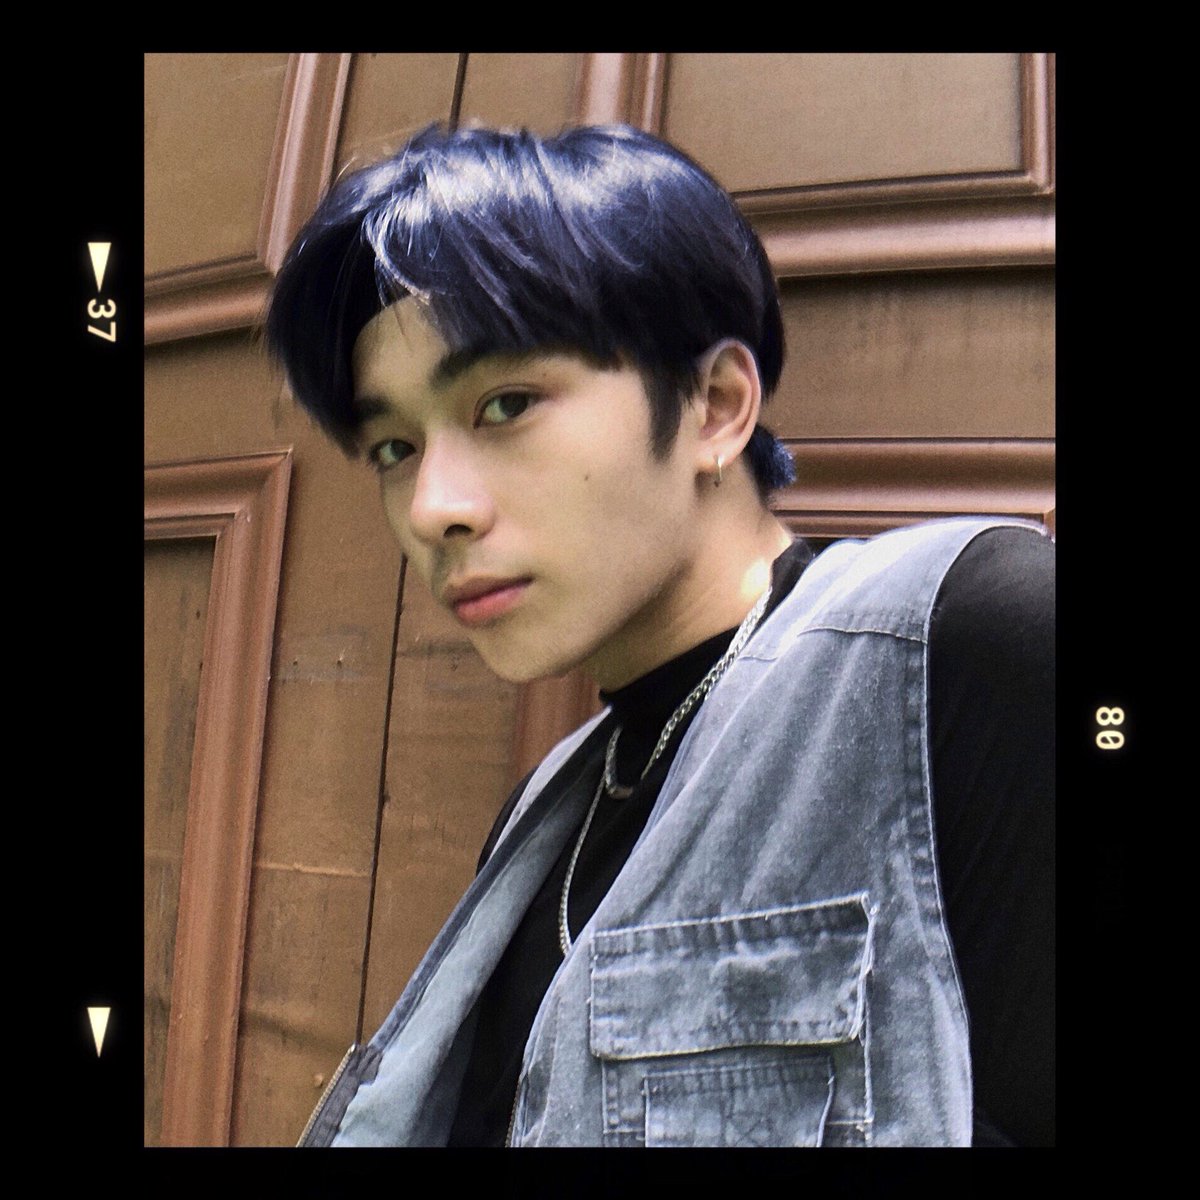 MEMBER #1 - ANGELO TROY RIVERAAge: 19Birthday: April 18, 2001Possible position: Main Dancer, Lead Rapper, LeaderBrief Background: He was part of dance crew called 'A-TEAM' which represented Philippines in the world stage multiple times.